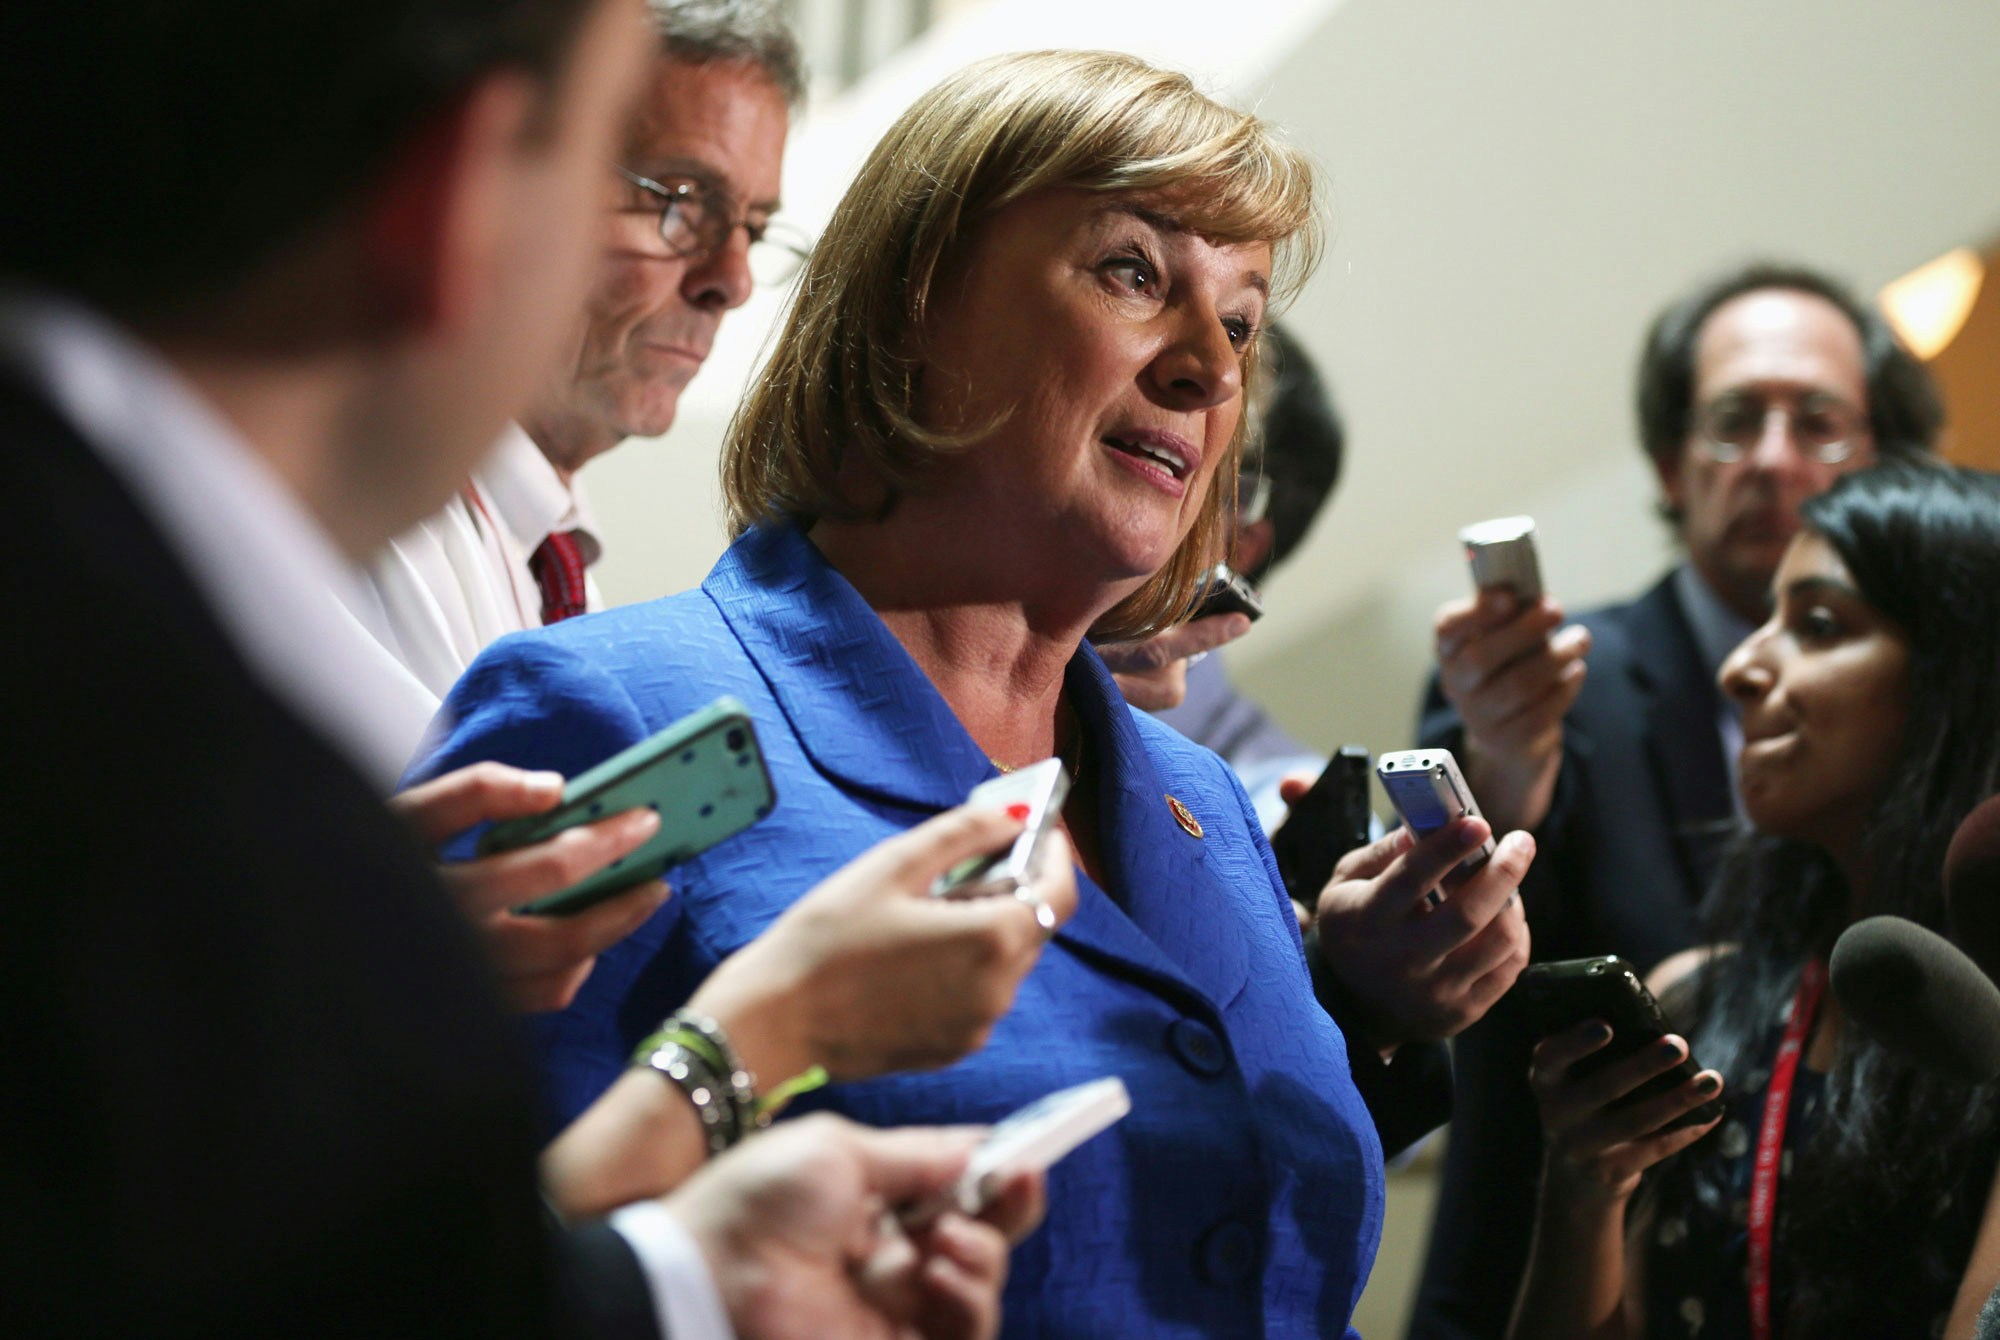 WASHINGTON, DC - SEPTEMBER 05:  U.S. Rep. Carol Shea-Porter (D-NH) speaks to members of the media after a members-only closed briefing on Syria for the U.S. Senate and the House of Representatives September 5, 2013 on Capitol Hill in Washington, DC. Senate Foreign Relations Committee has approved a resolution for a strike in Syria. The full Senate is expected to vote on it soon.  (Photo by Alex Wong/Getty Images)